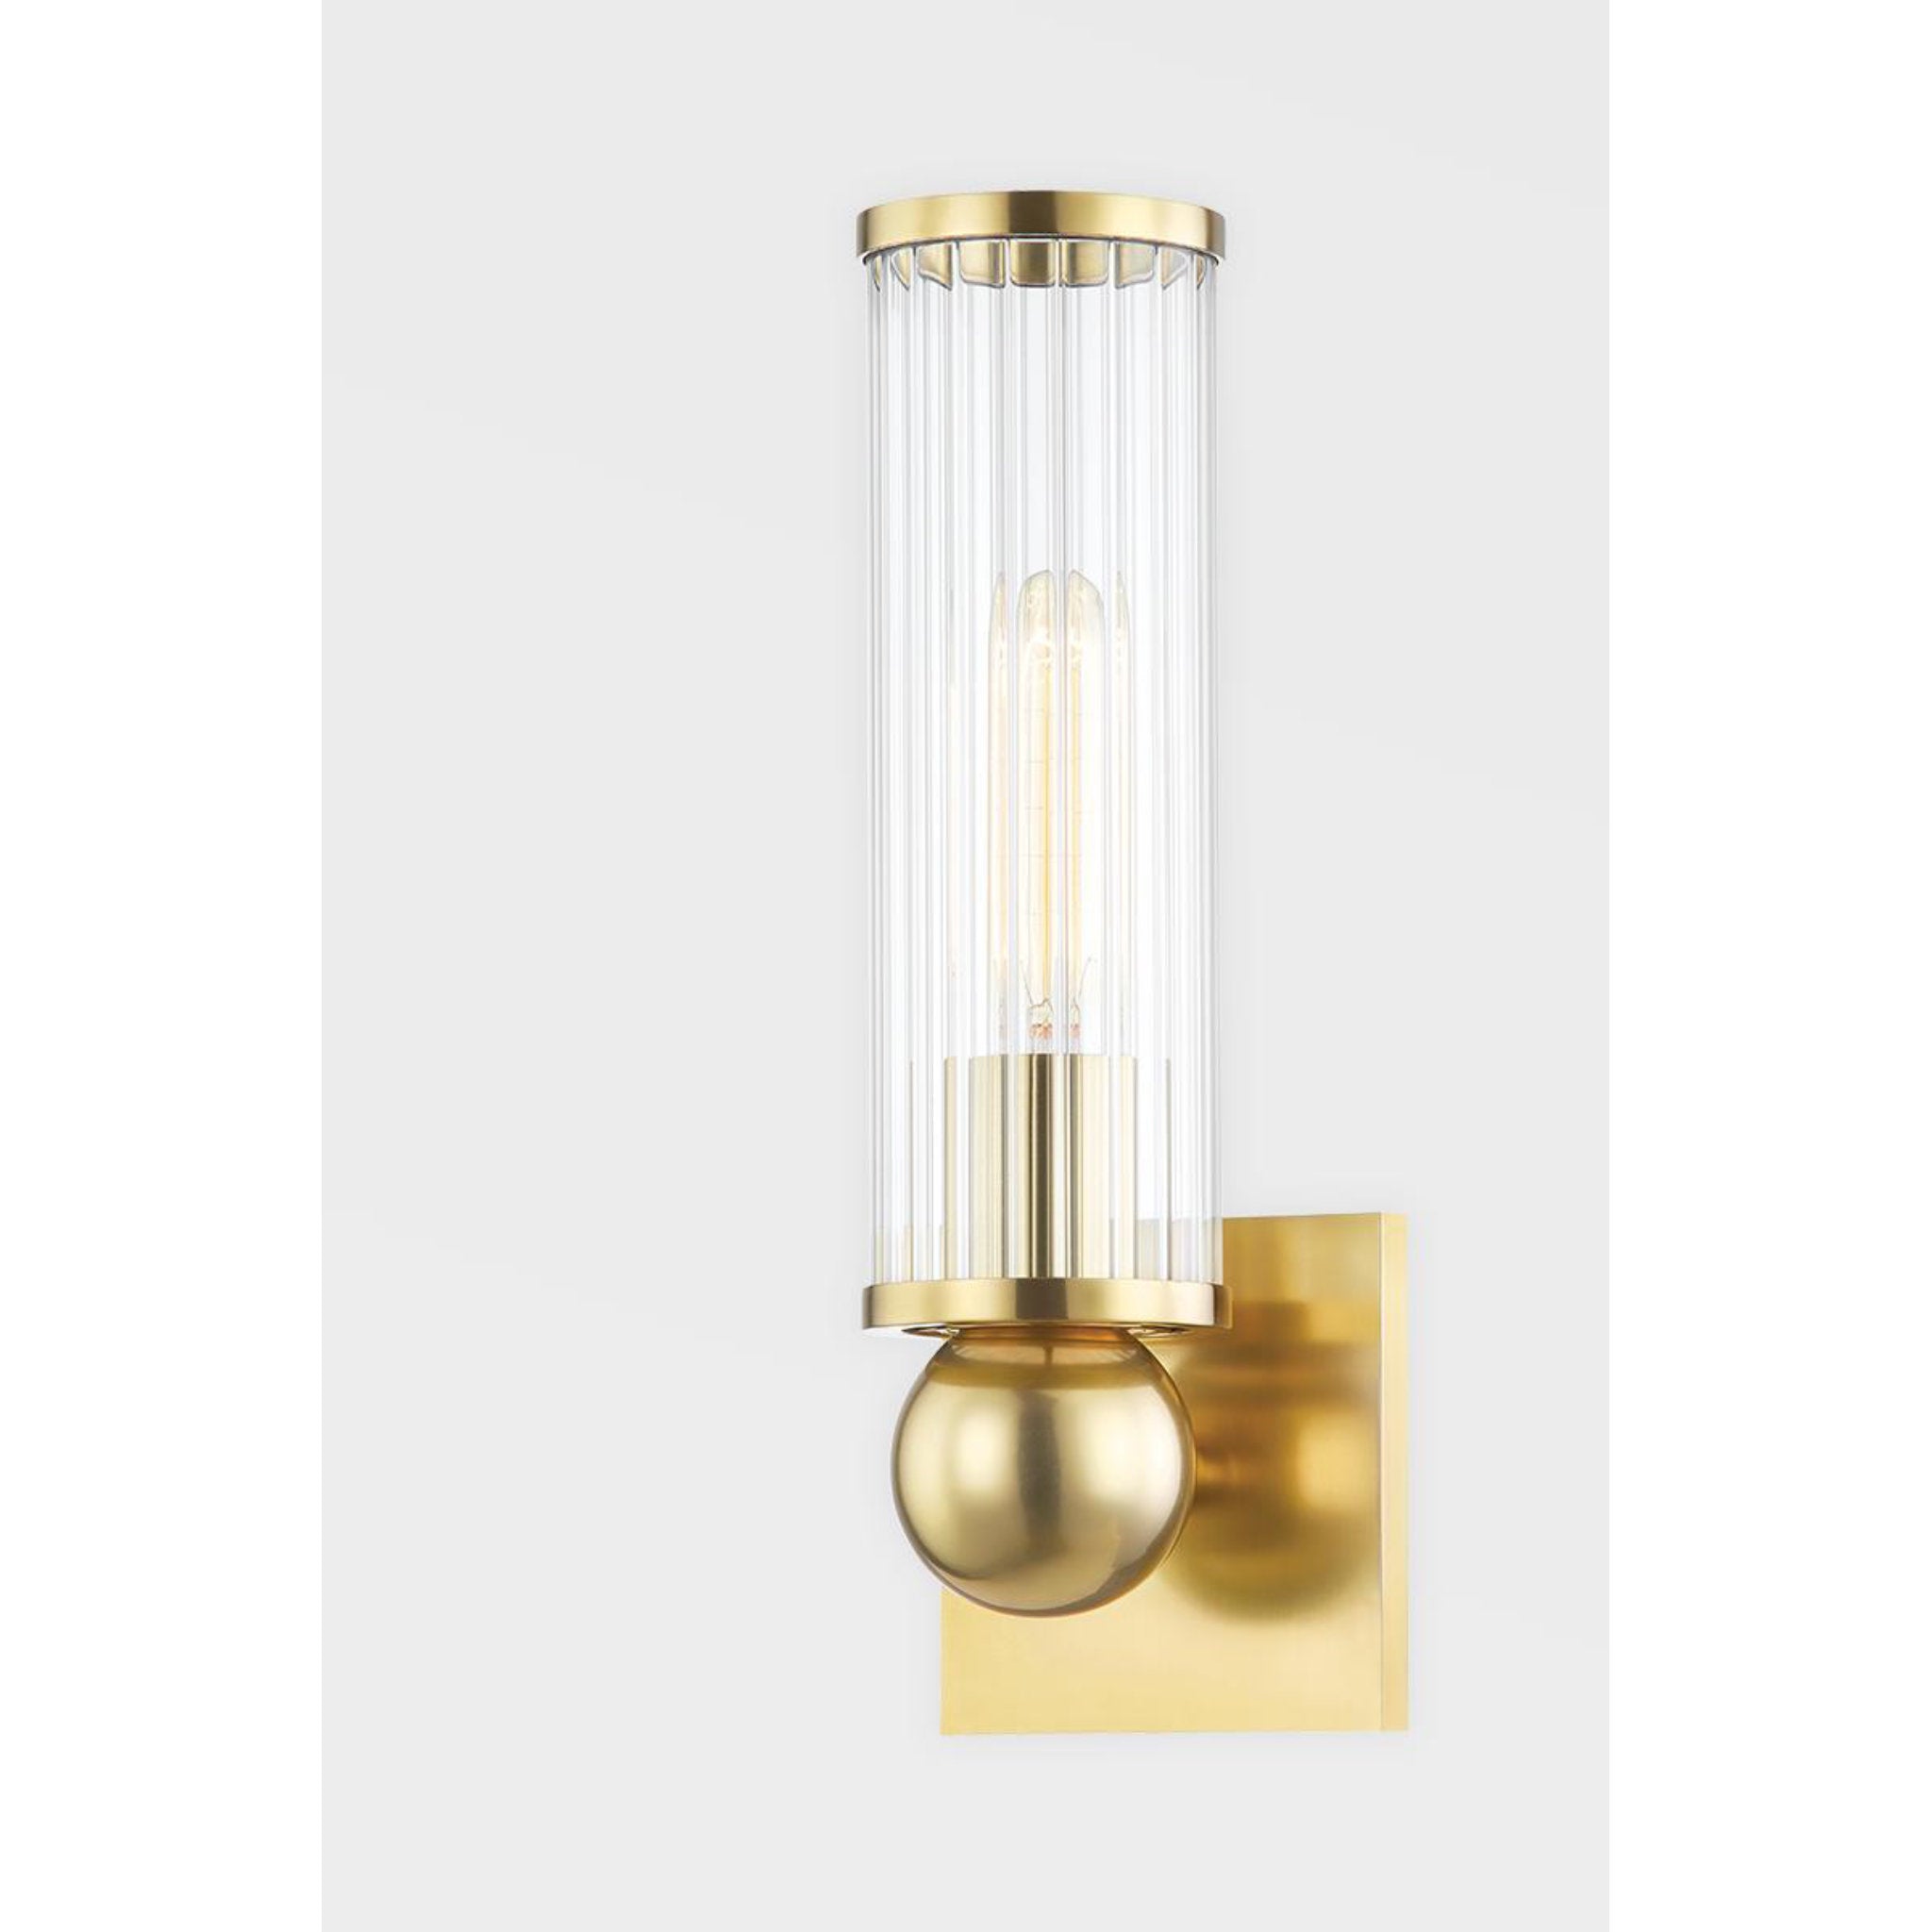 Malone 2 Light Wall Sconce in Polished Nickel